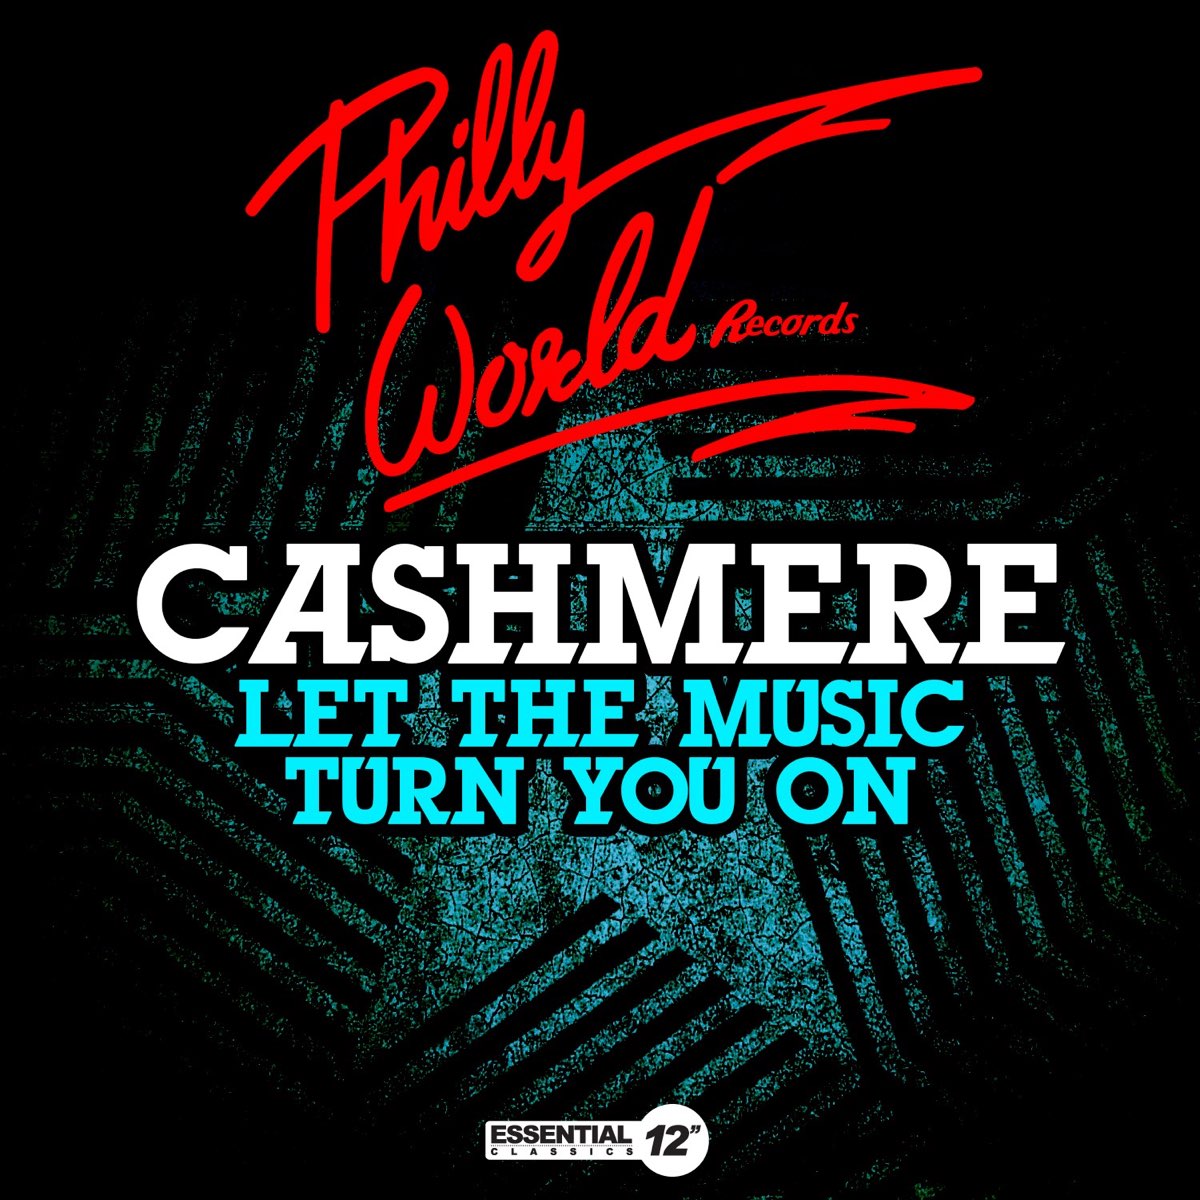 Lets Cashmere. Turn on the Music. Turn the Music loudly. Can you turn the music